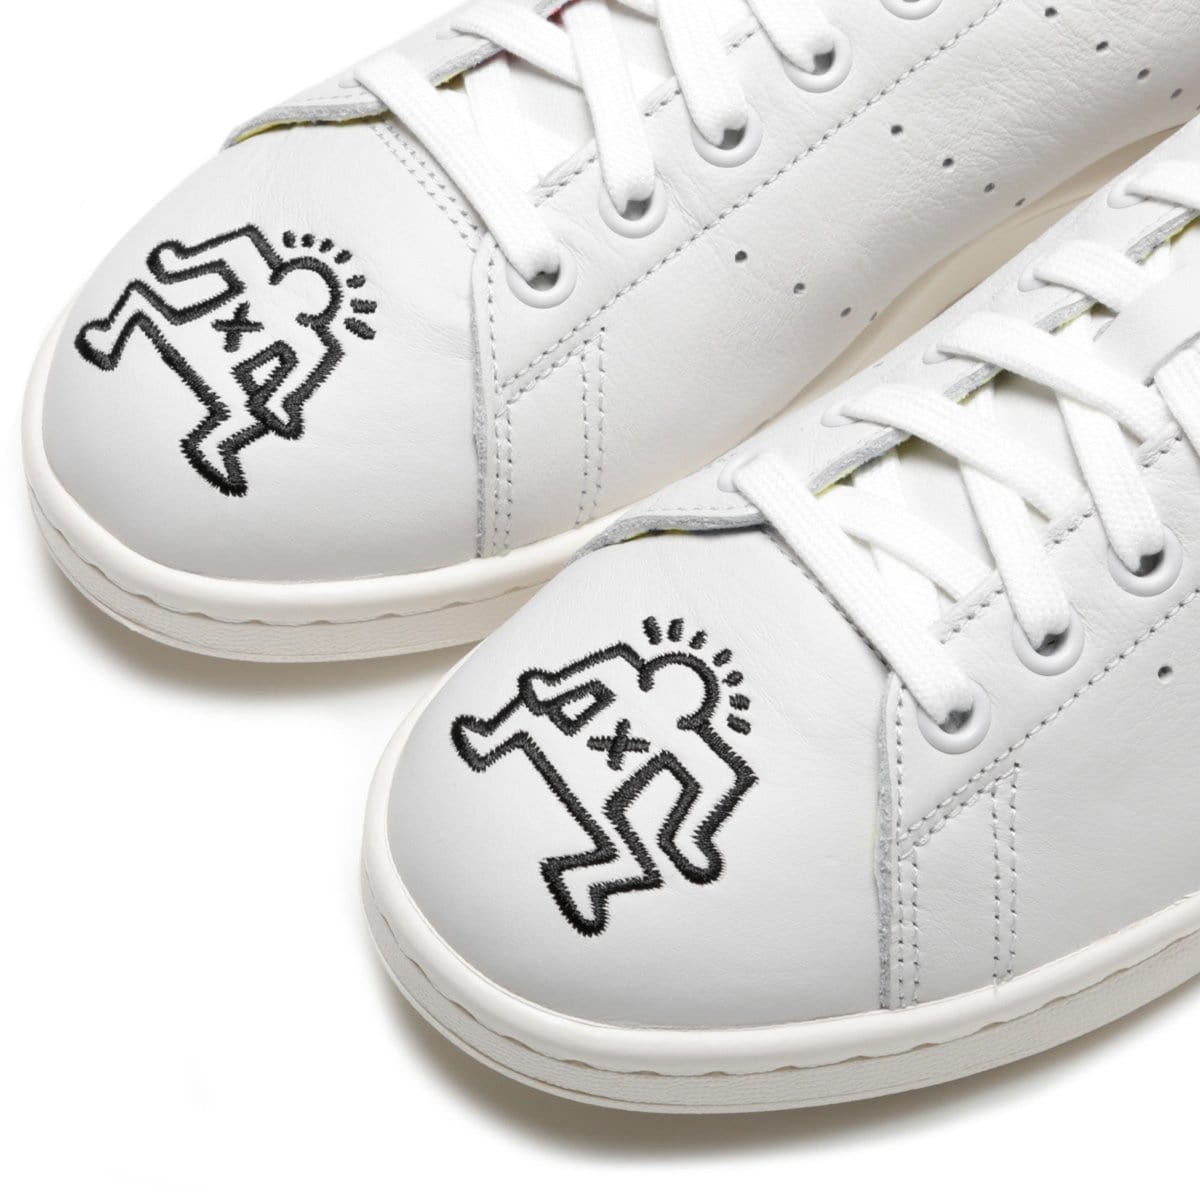 stan smith keith haring shoes